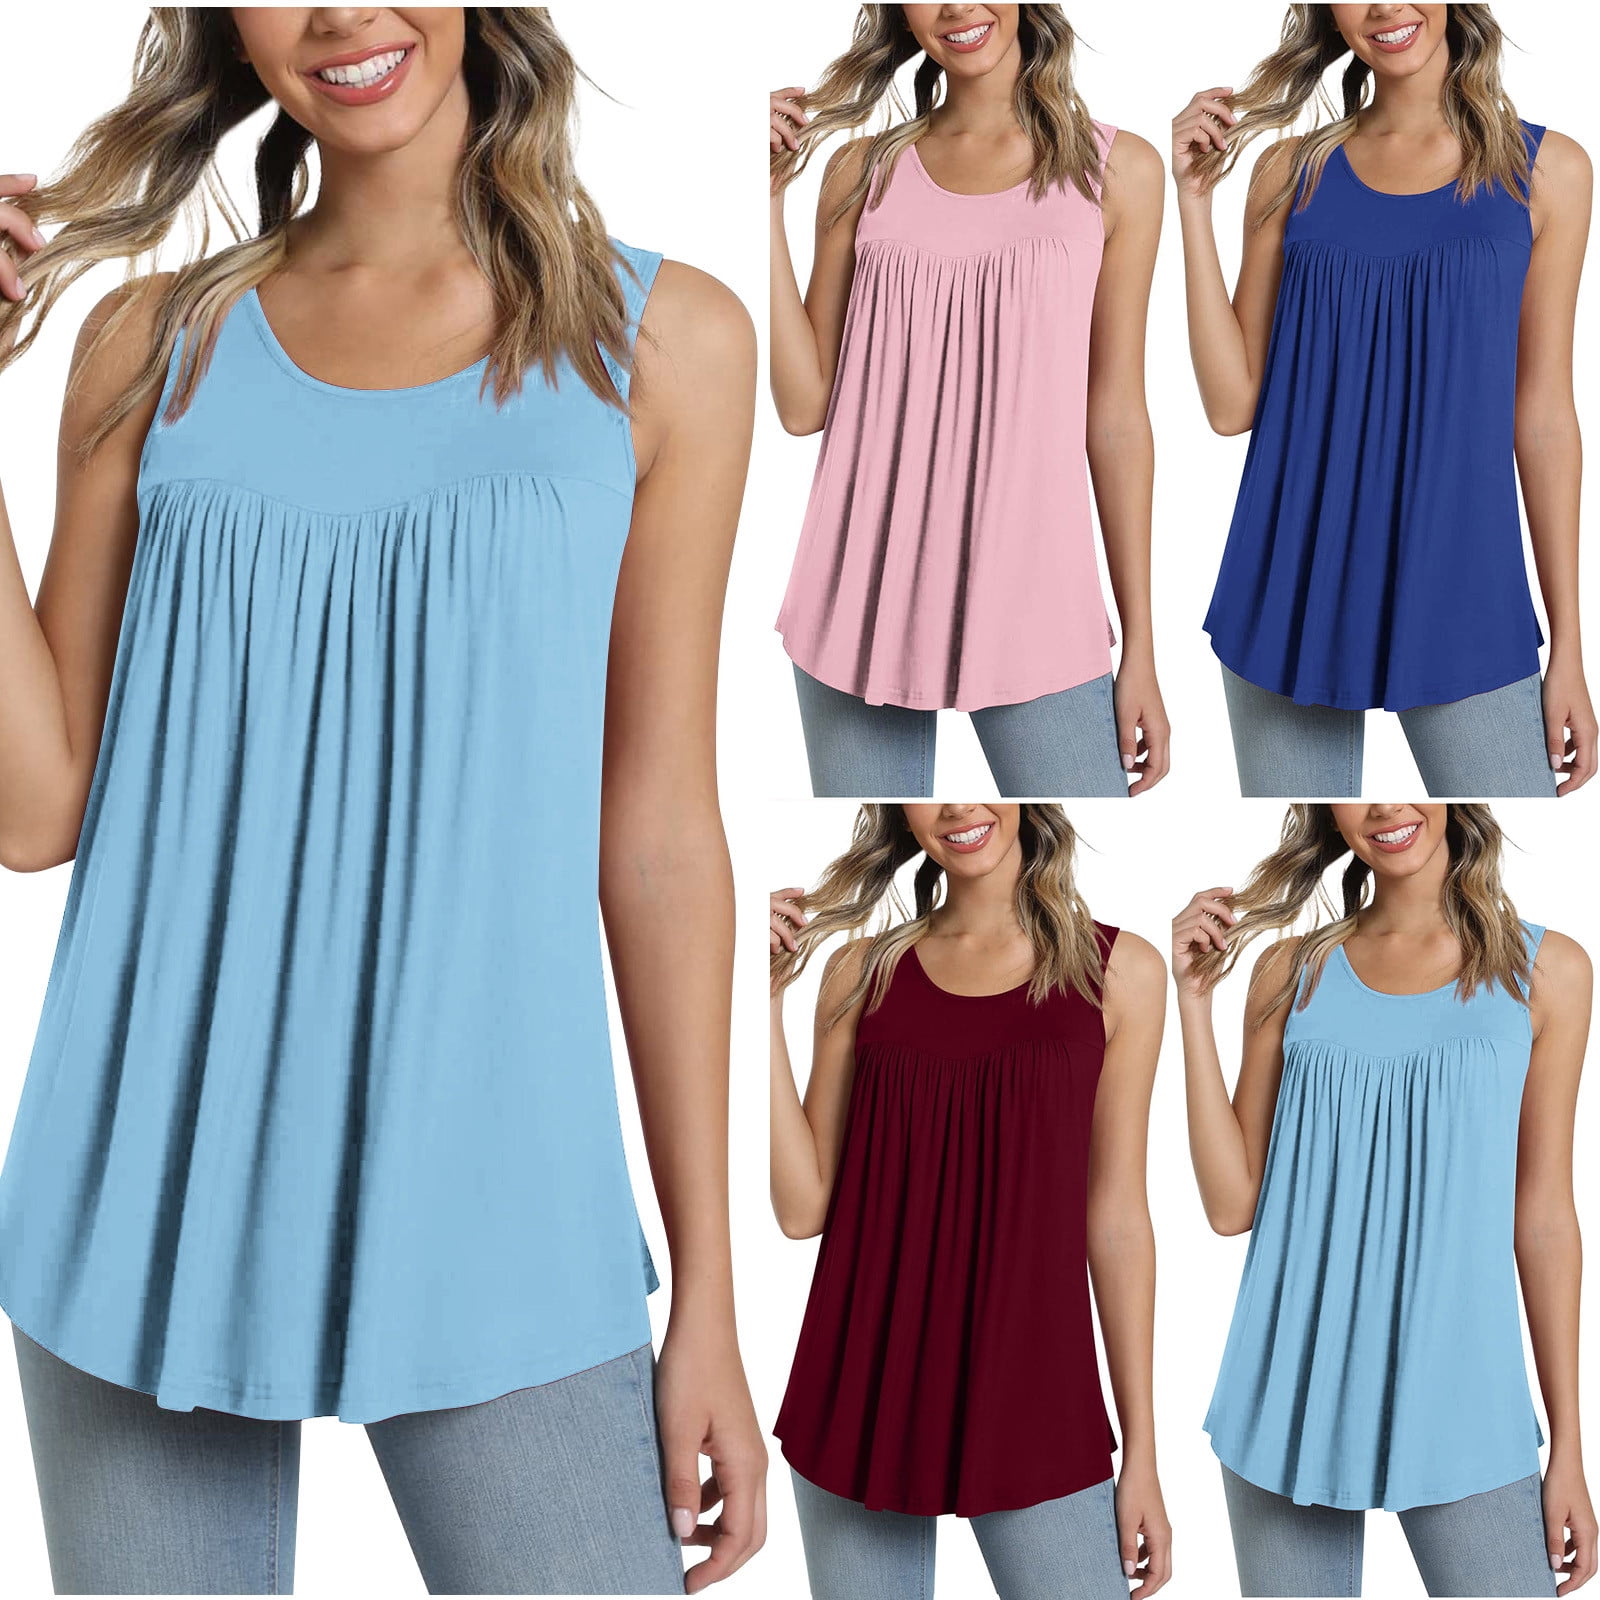 3/4 Sleeves Tops for Women, Blouses for Women Casual Womens Tops Tunic  Cotton T Shirts Summer Blouse Ladies Tops and Blouses Overstock Items  Clearance All  Boxes For Sale Unclaimed #3 